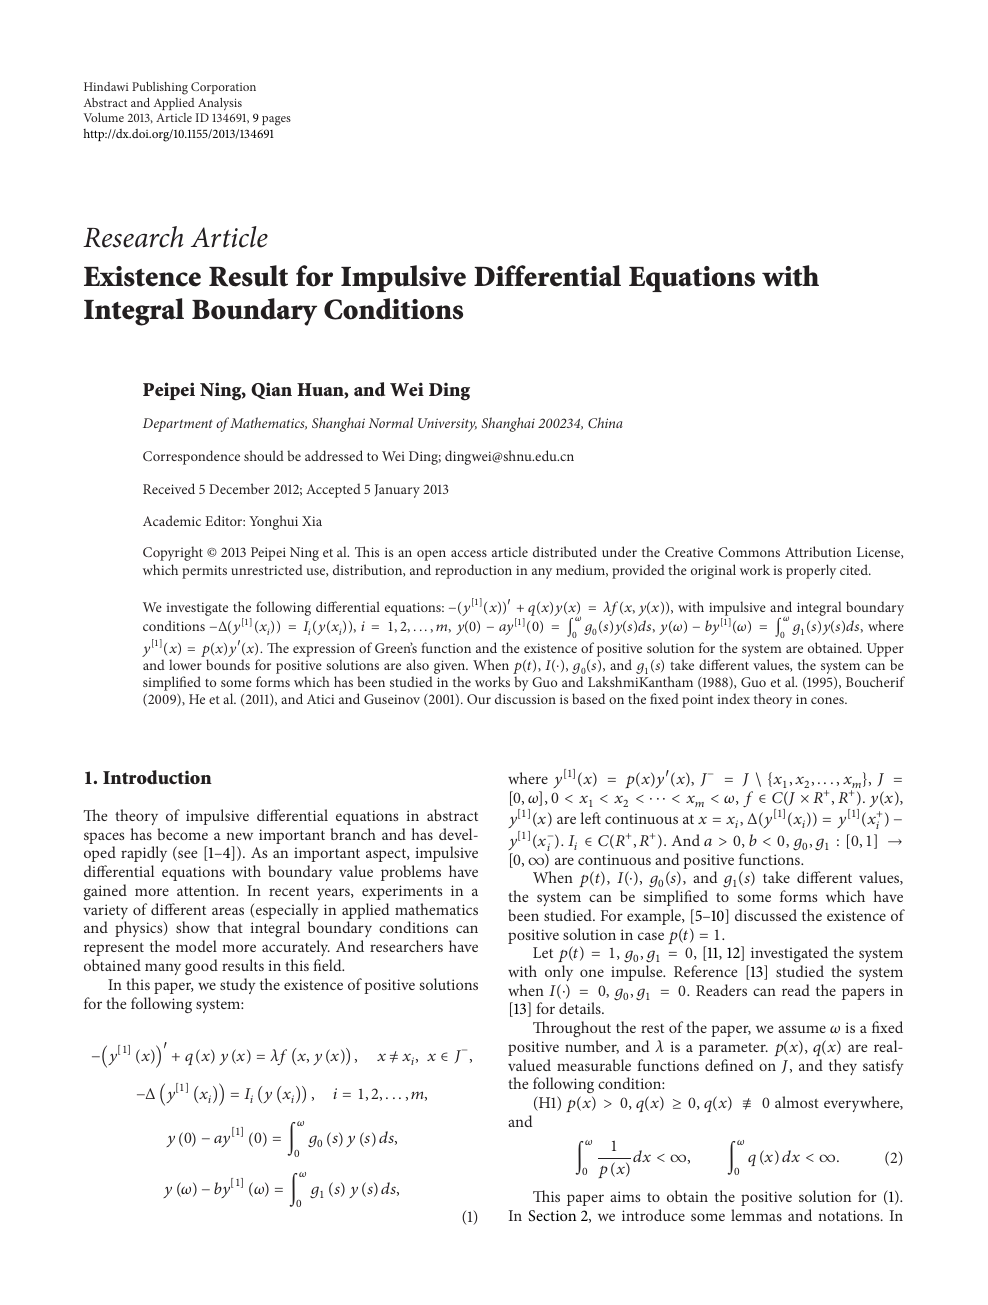 Existence Result For Impulsive Differential Equations With Integral Boundary Conditions Topic Of Research Paper In Mathematics Download Scholarly Article Pdf And Read For Free On Cyberleninka Open Science Hub